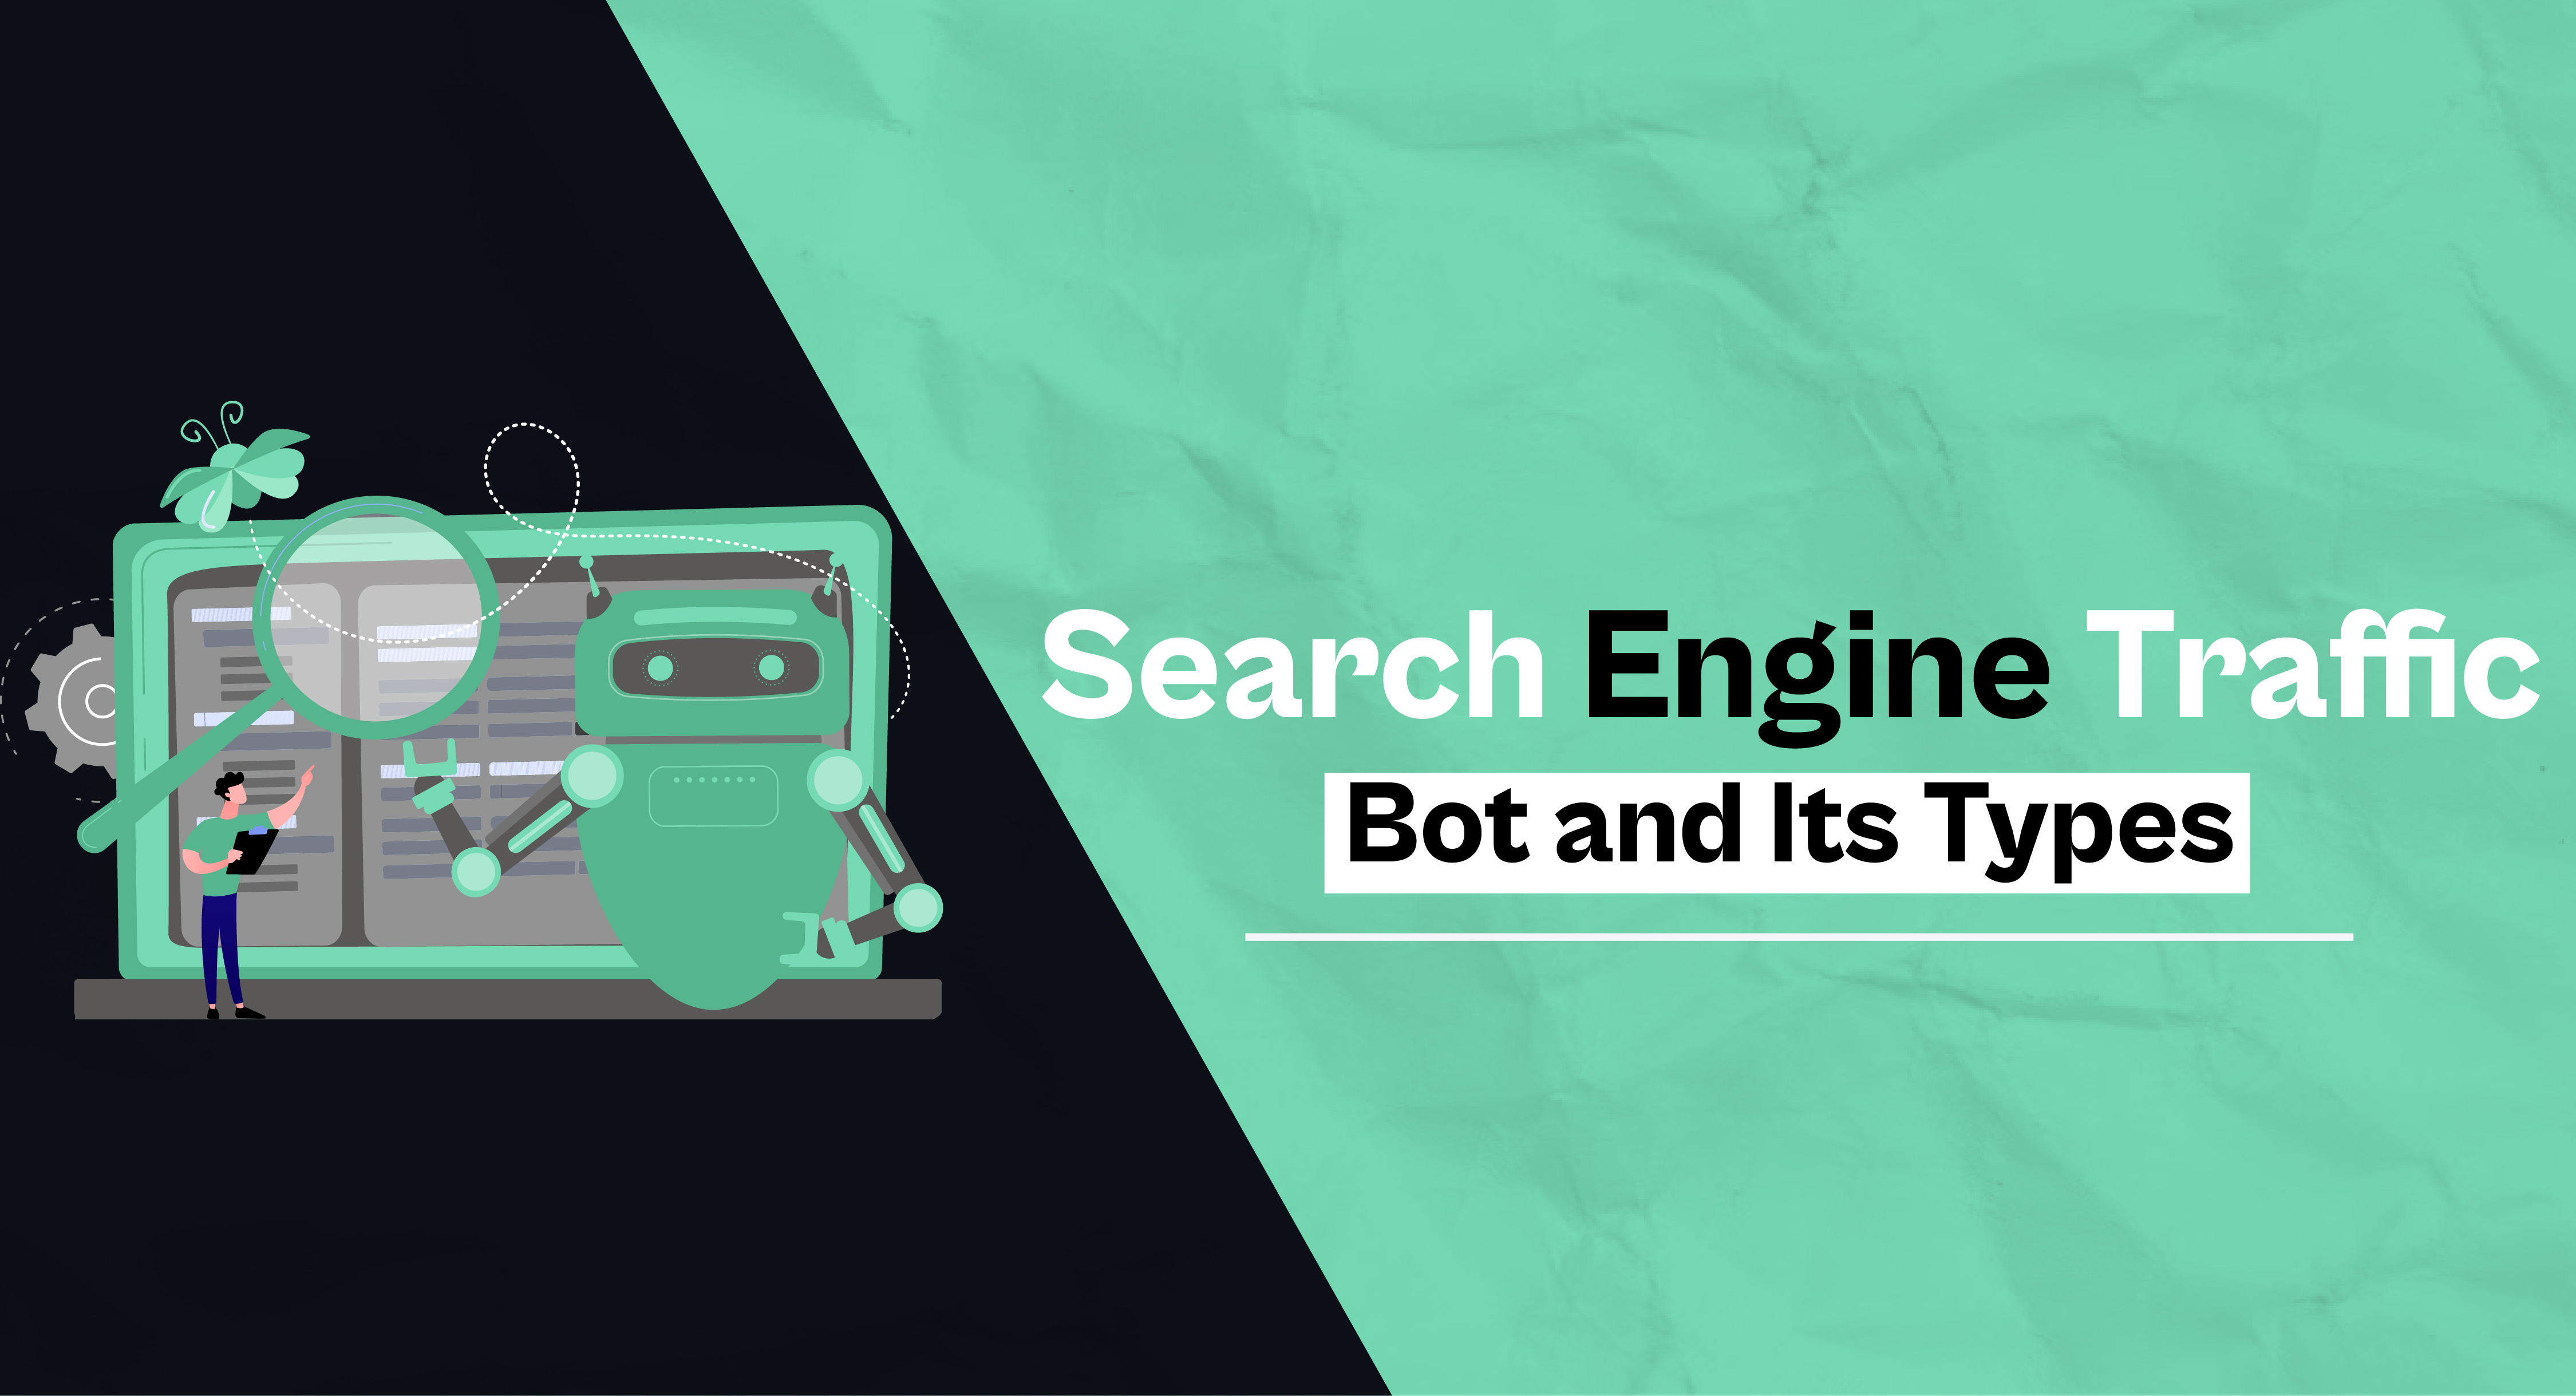 Bots awareness in search engine traffic